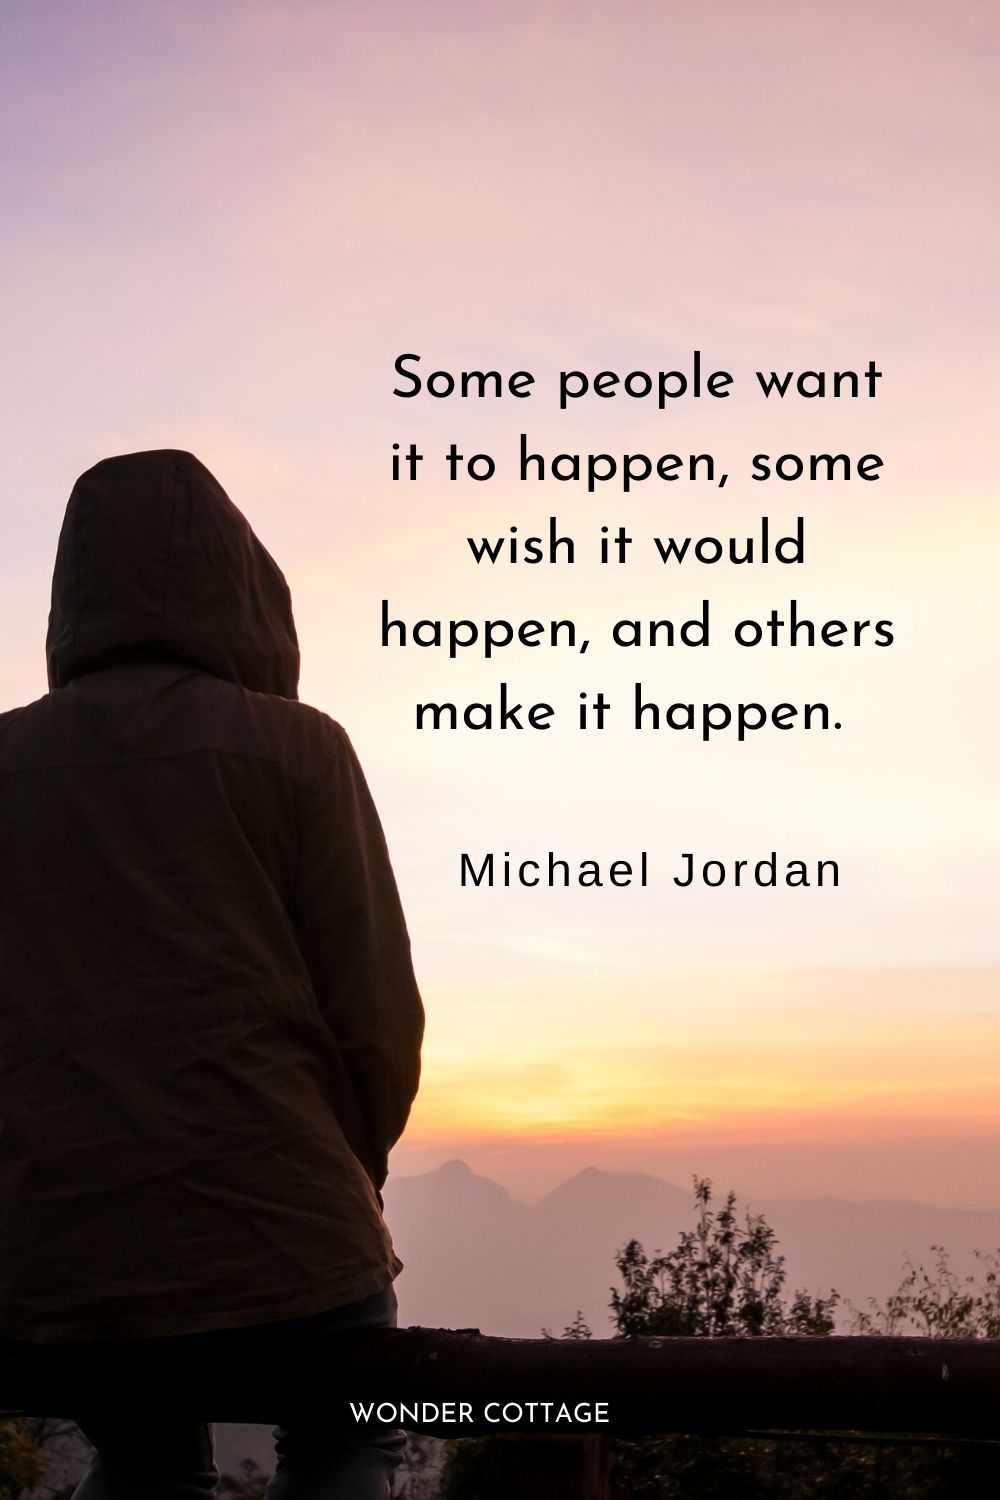 Some people want it to happen, some wish it would happen, and others make it happen. Michael Jordan